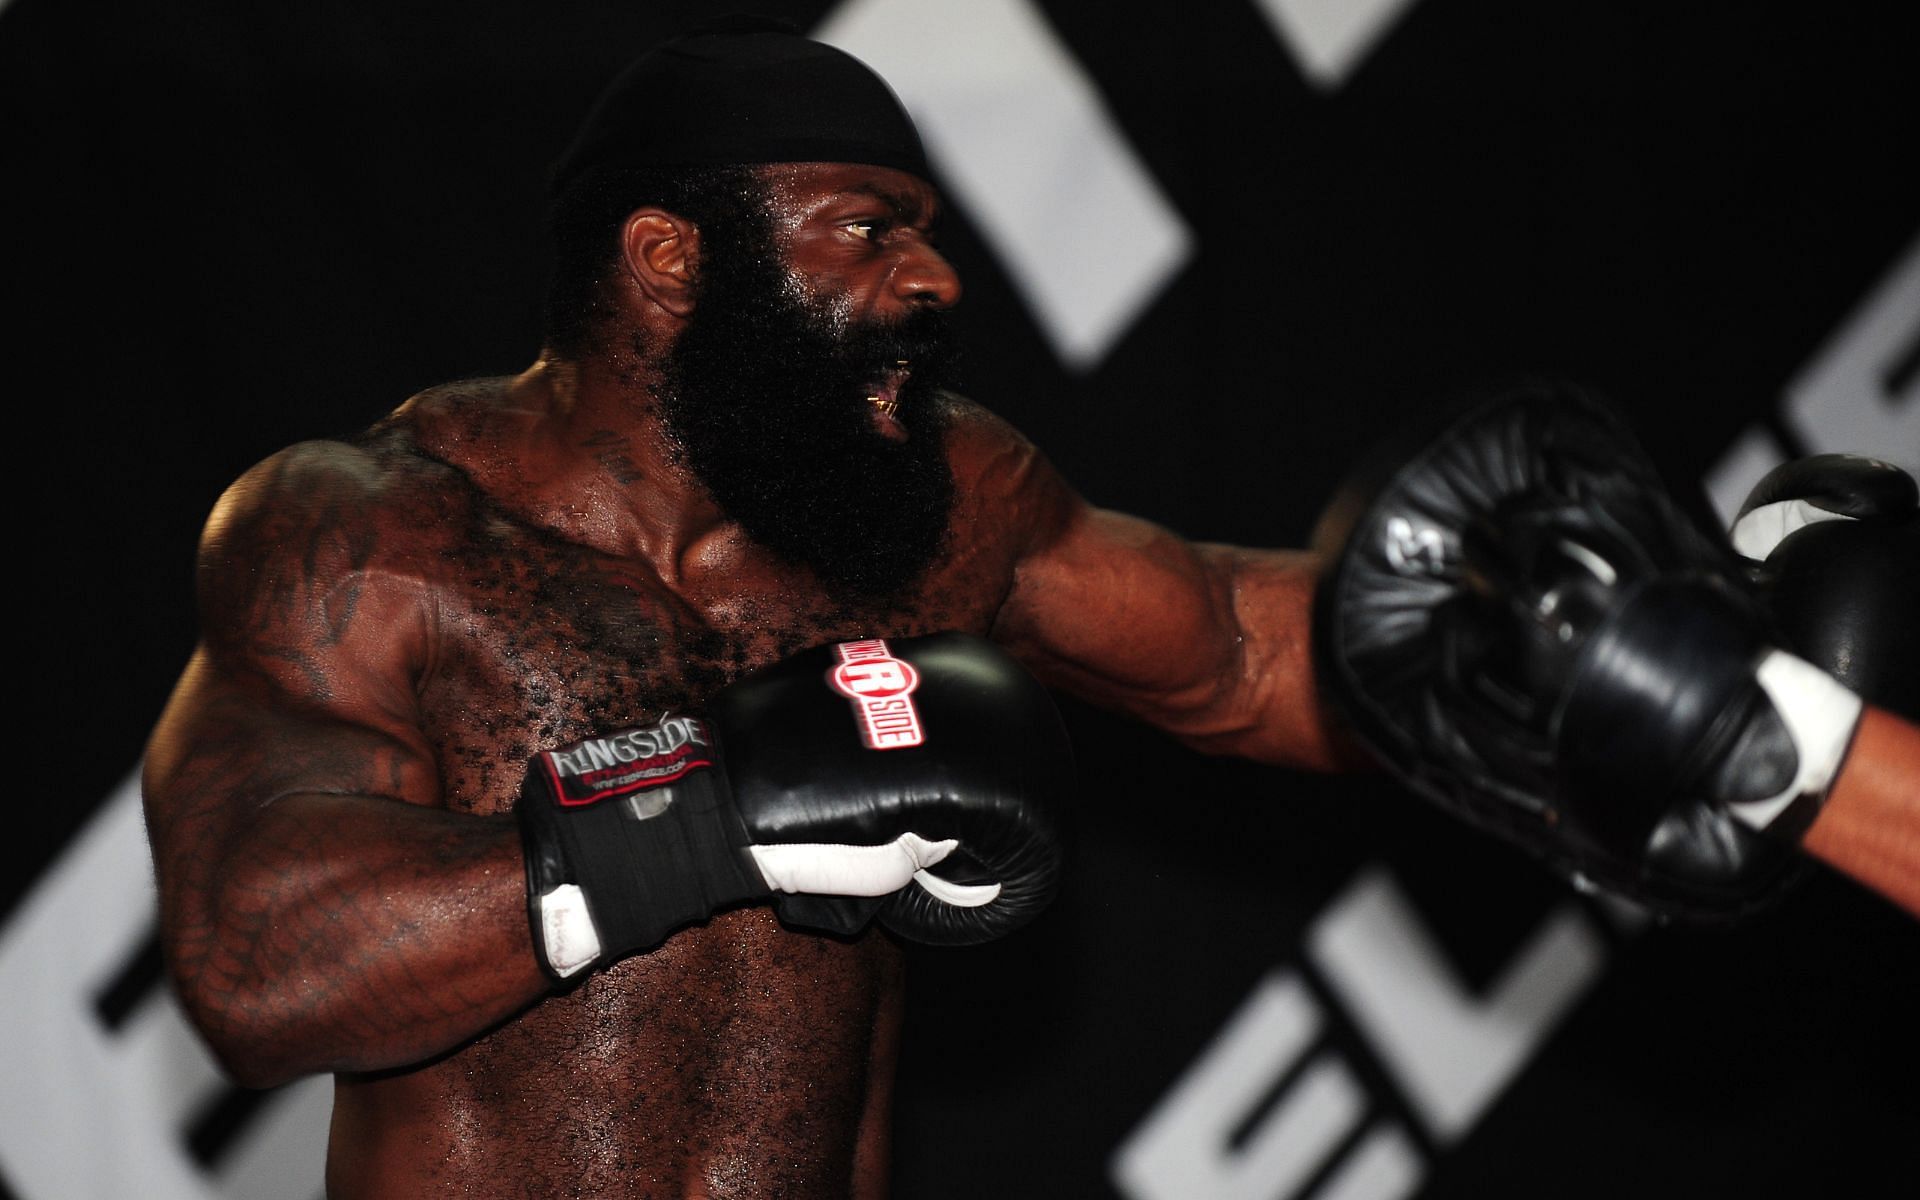 Kimbo Slice during a public workout session at Legends Mixed Martial Arts Training Center